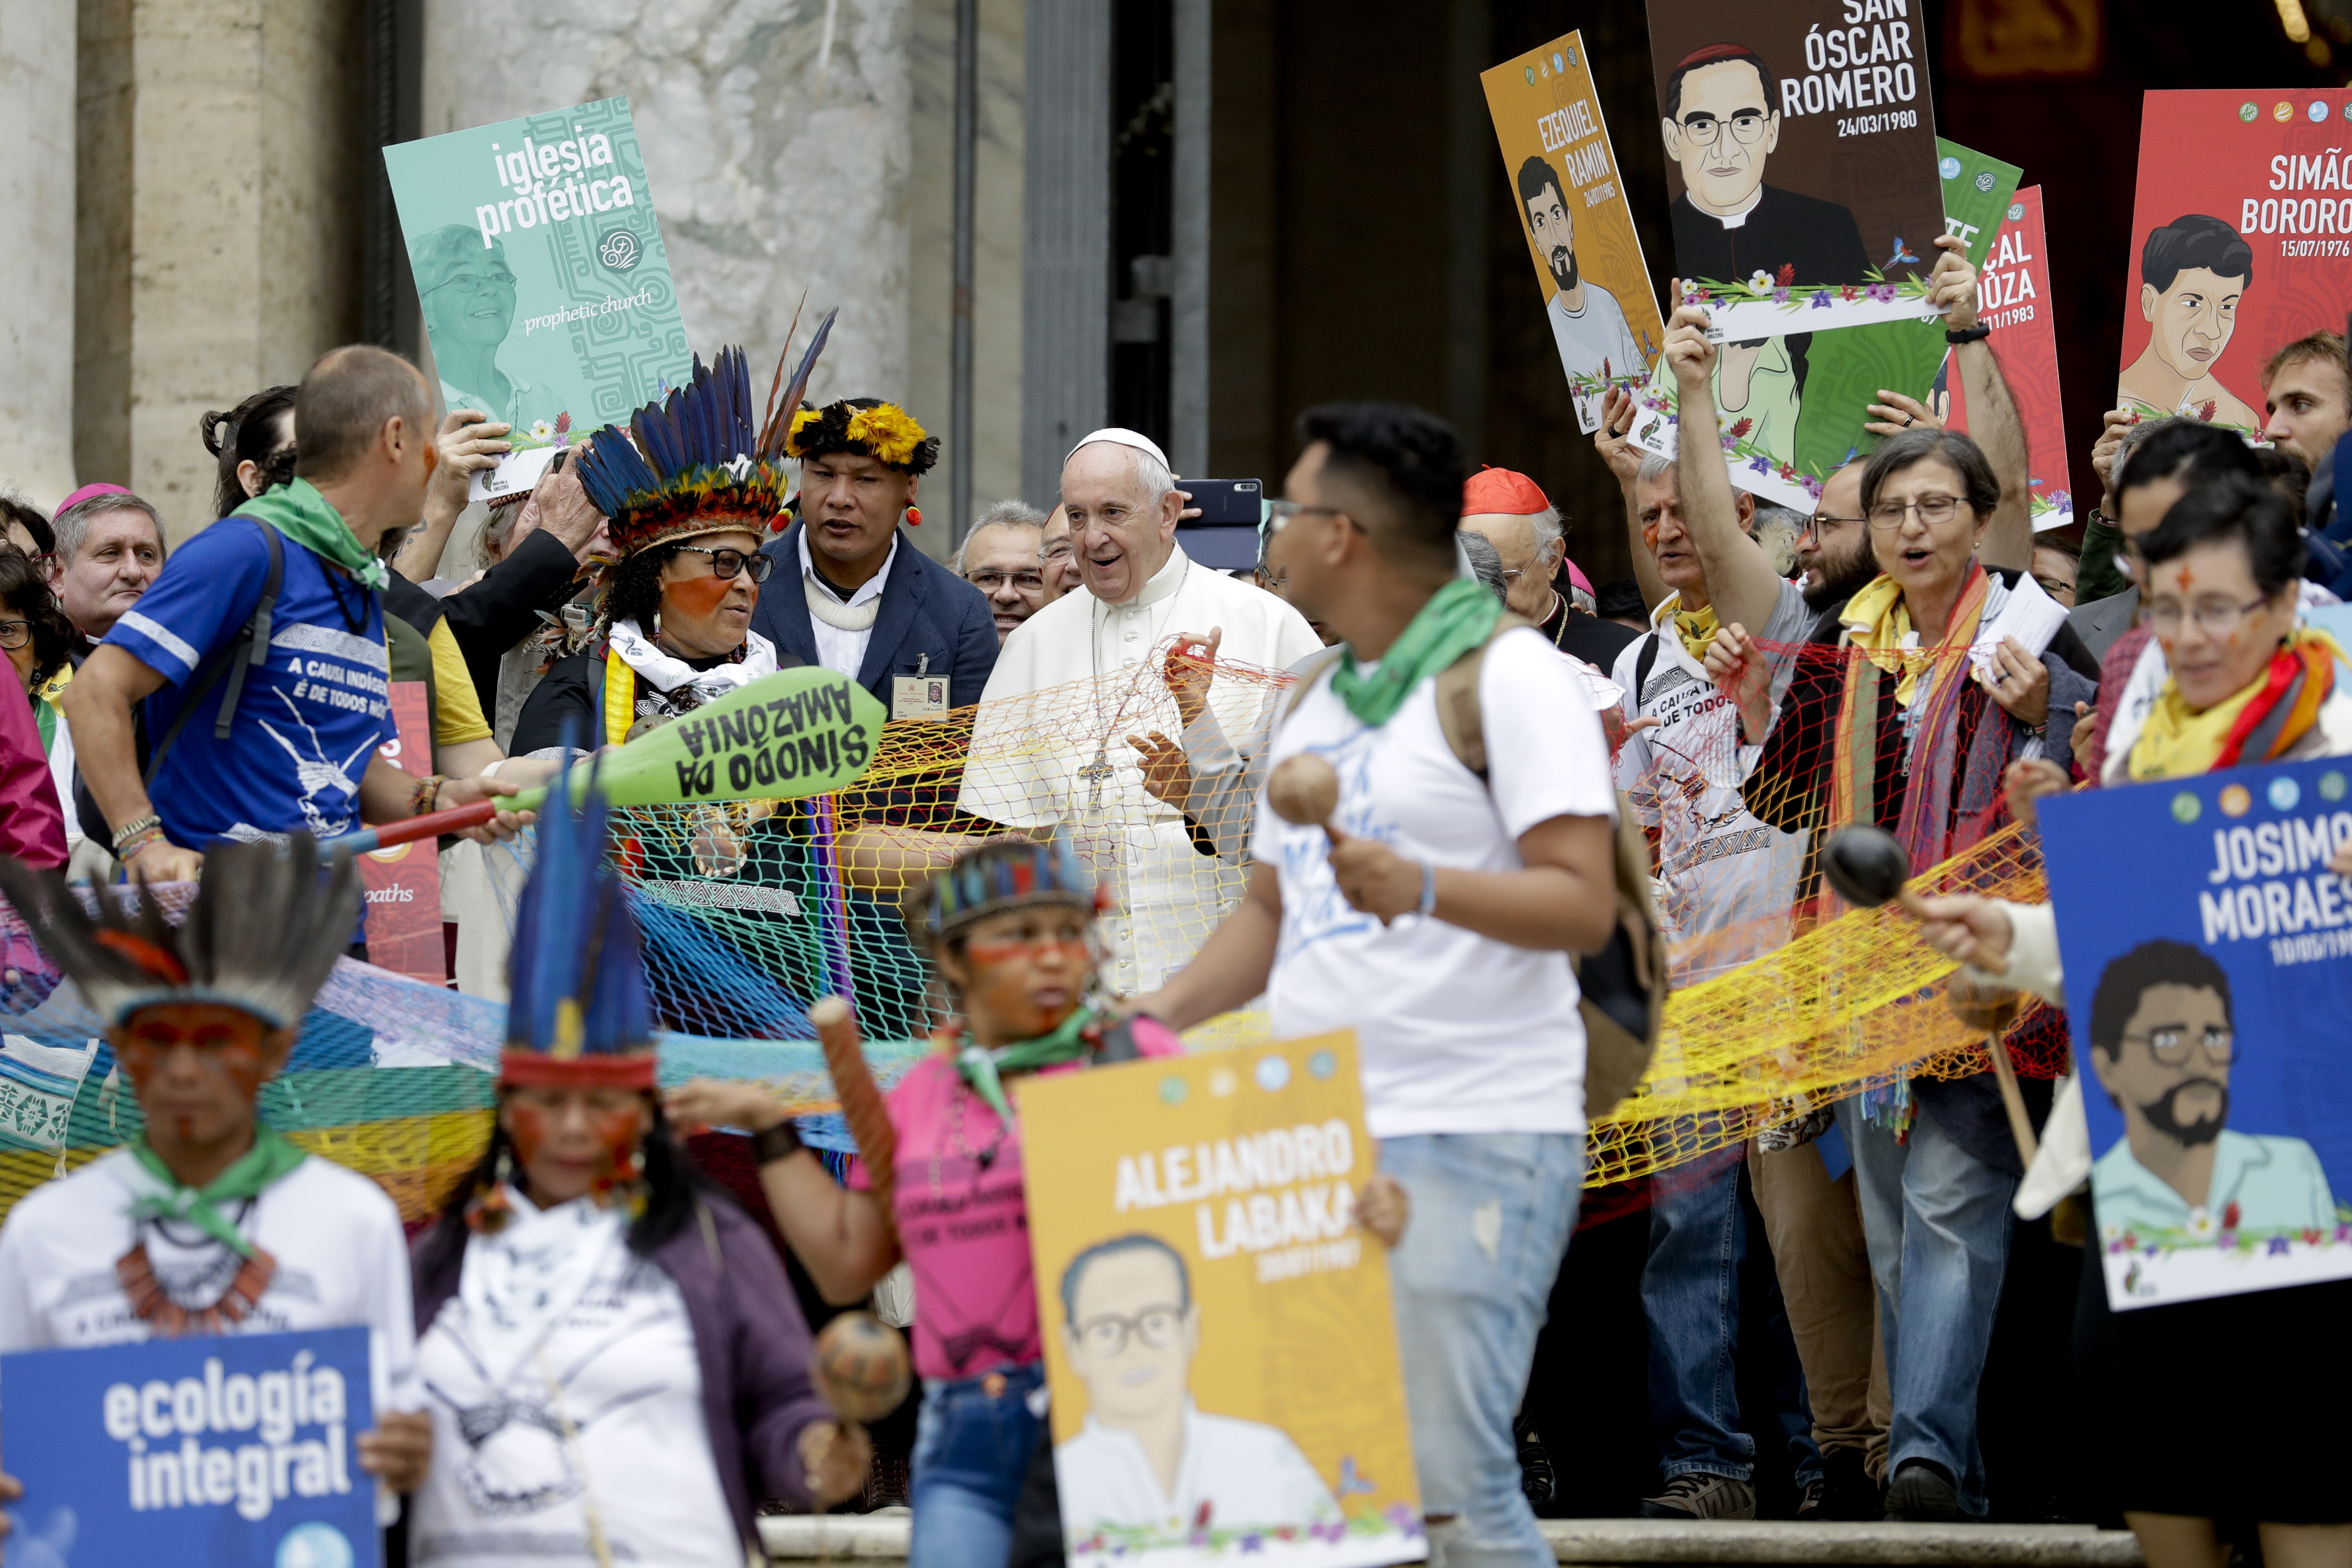 Pope Francis walks in procession on the occasion of the Amazon synod, at the Vatican, Monday, Oct. 7, 2019. Pope Francis opened a three-week meeting on preserving the rainforest and ministering to its native people as he fended off attacks from conservatives who are opposed to his ecological agenda. (AP Photo/Andrew Medichini)